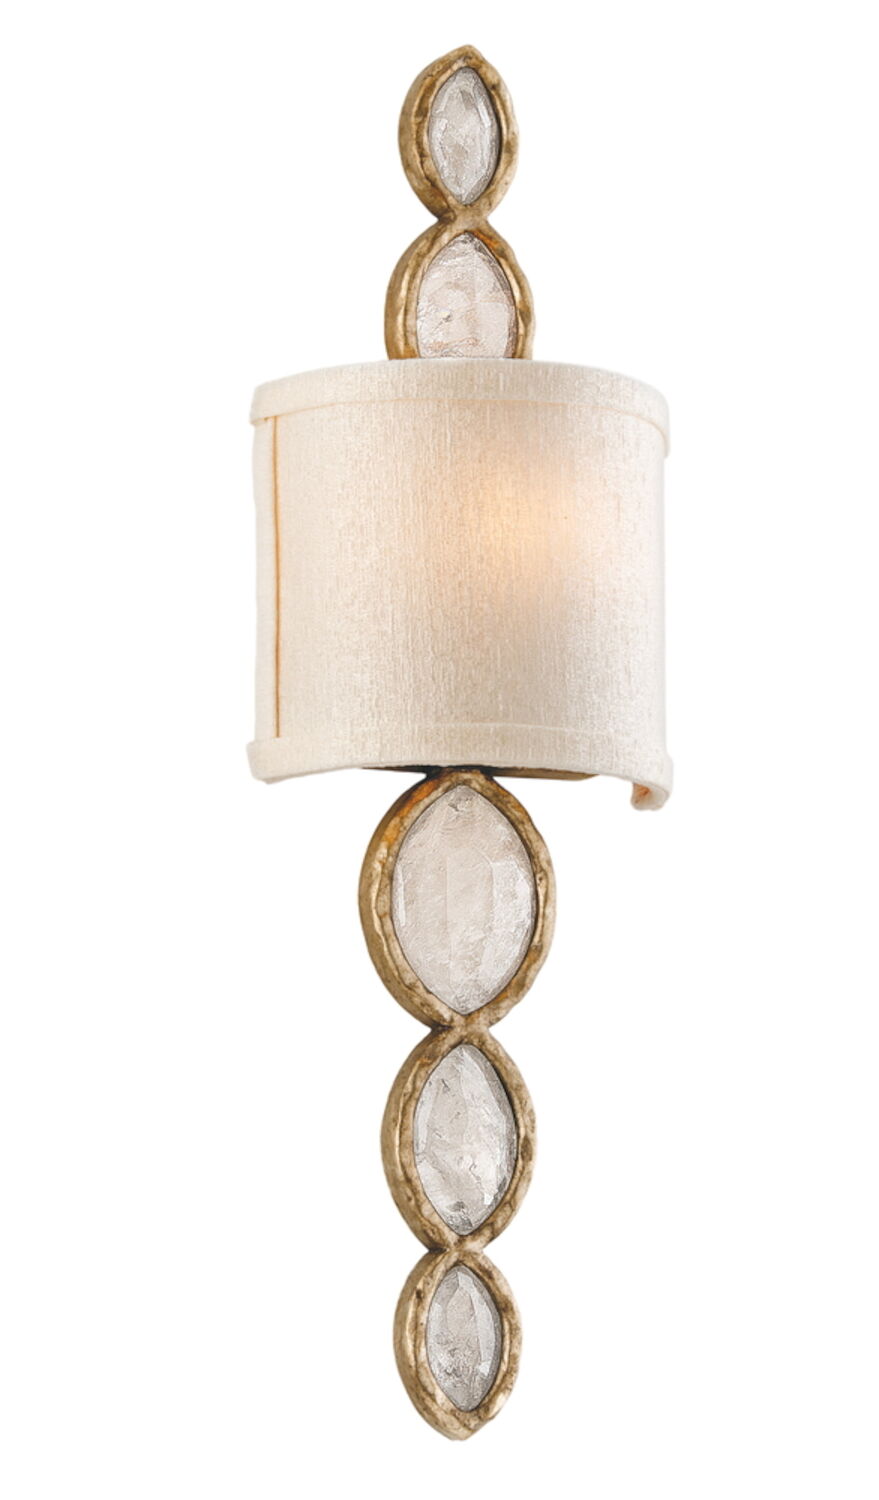 FAME & FORTUNE 1-LIGHT WALL SCONCE